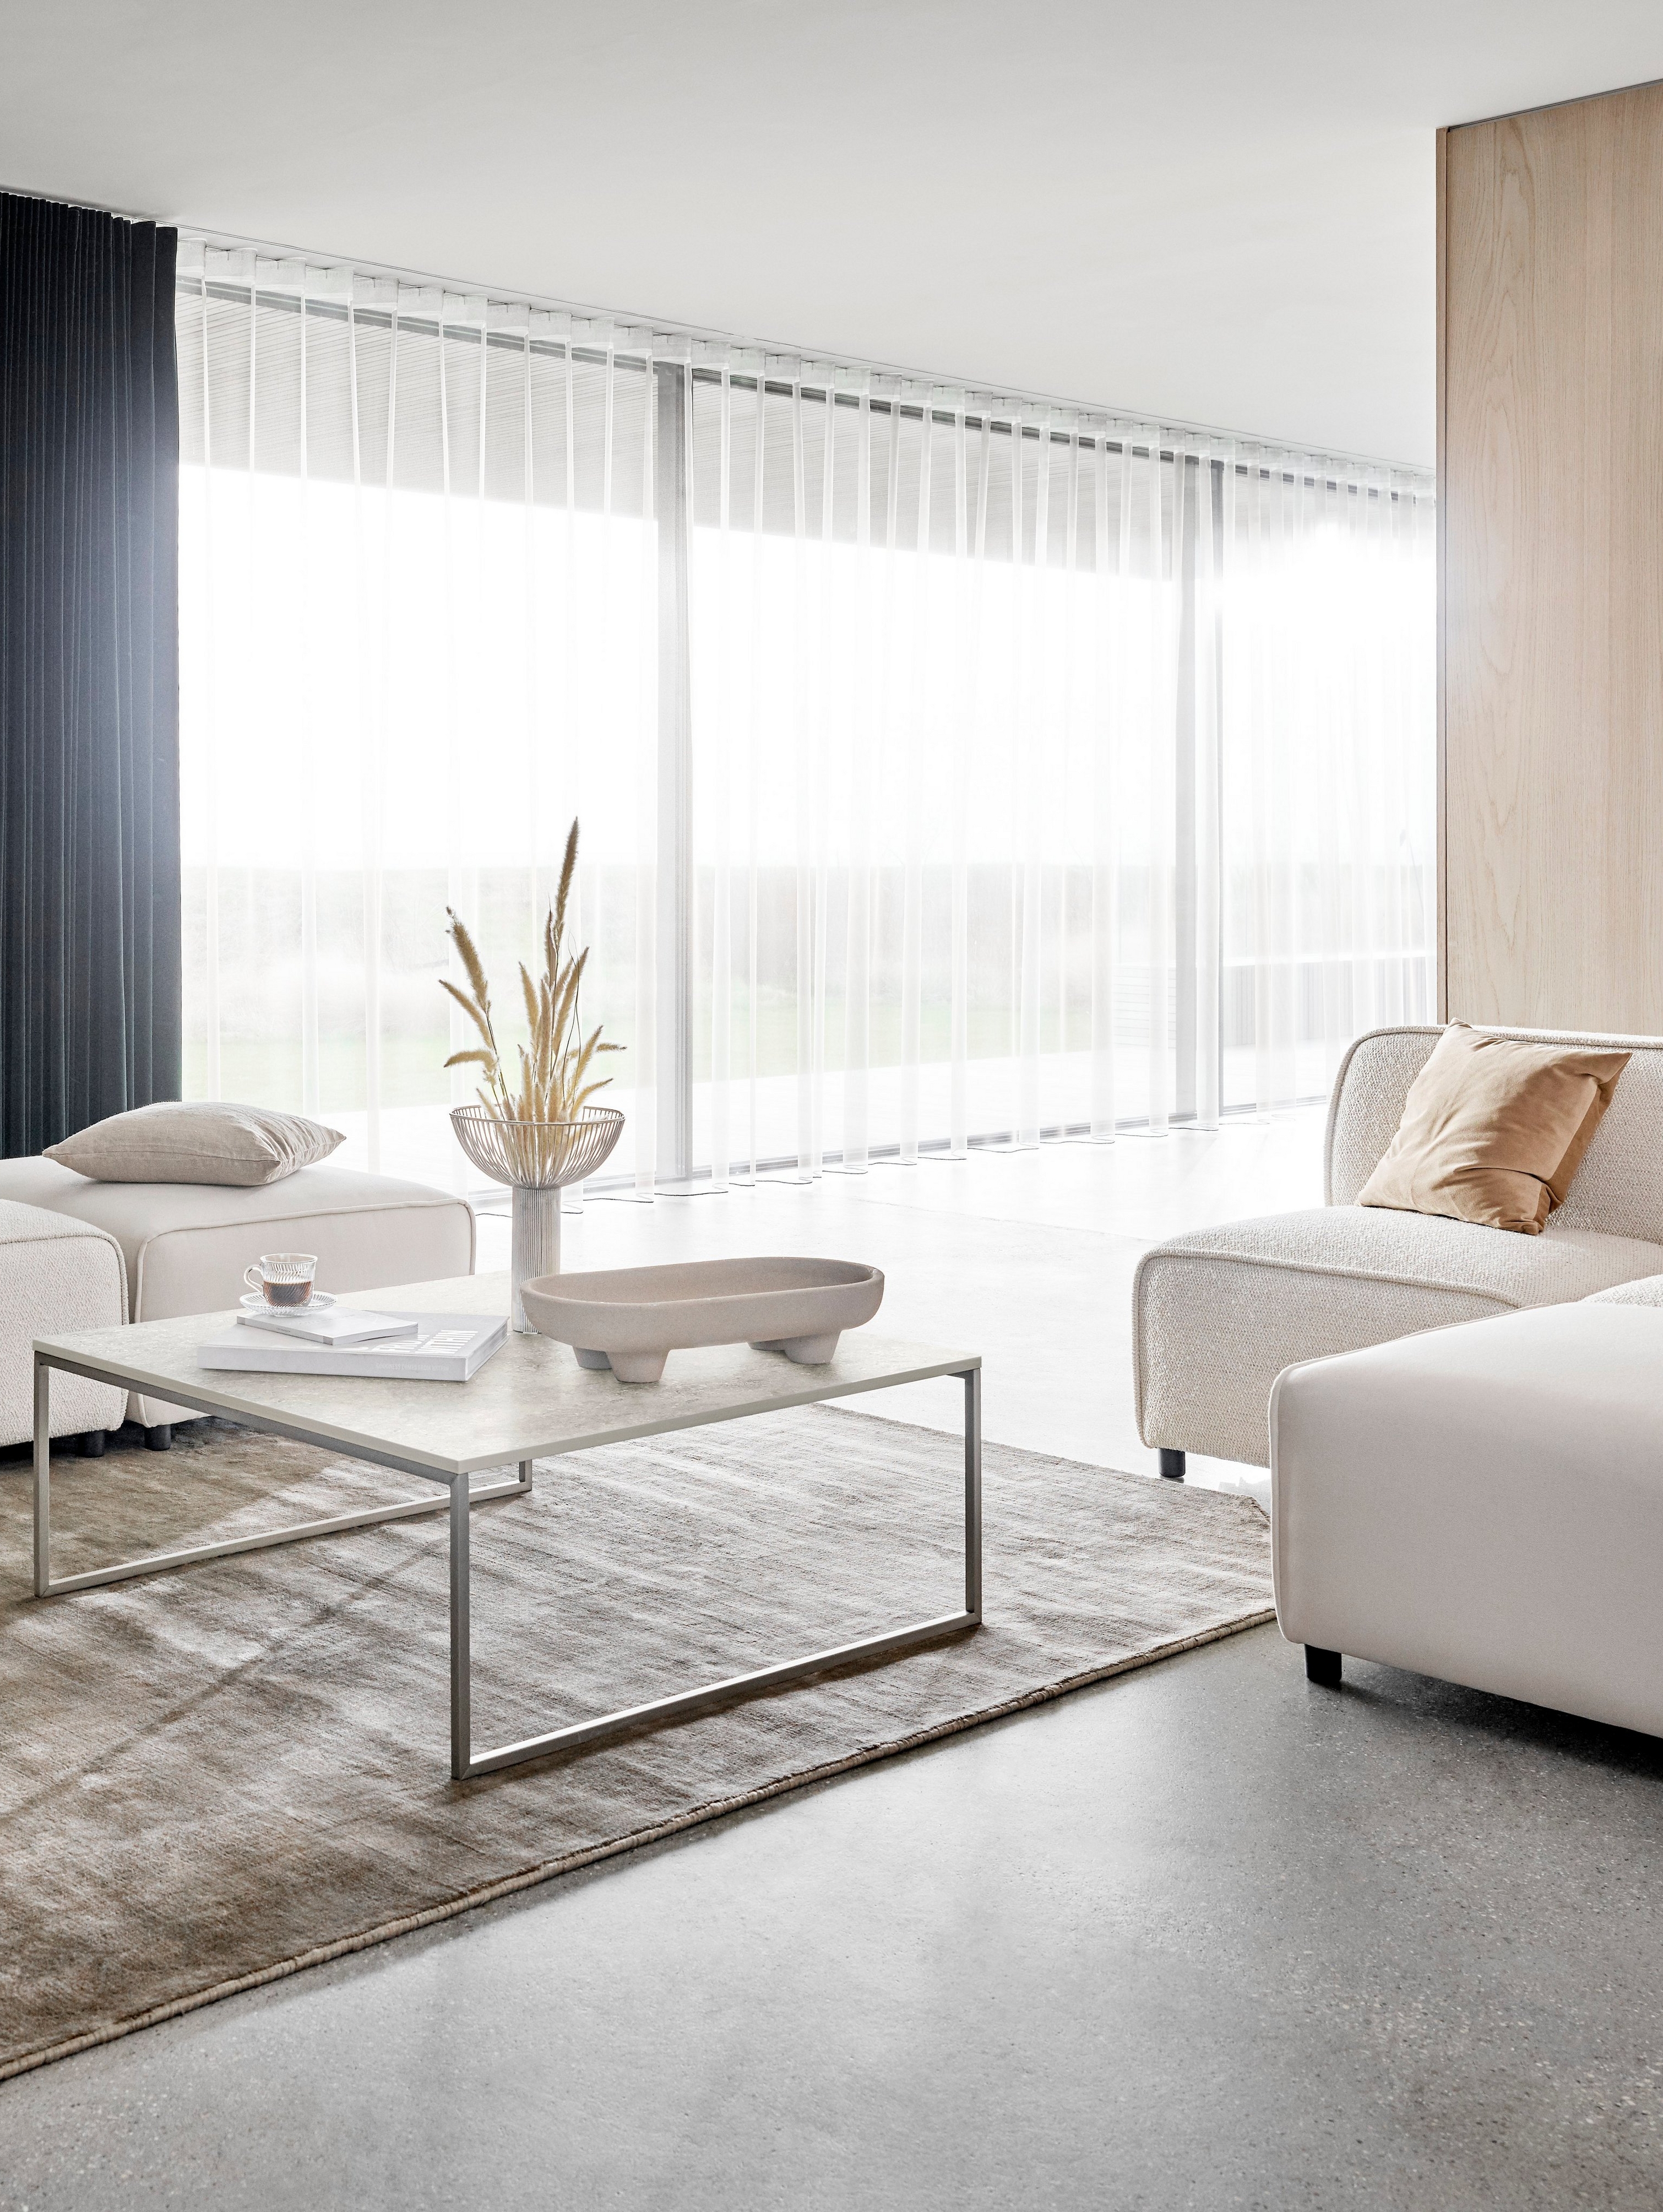 Carmo sofa with lounging unit, Carmo foot stool in a white Lazio fabric with the Lugo coffee table